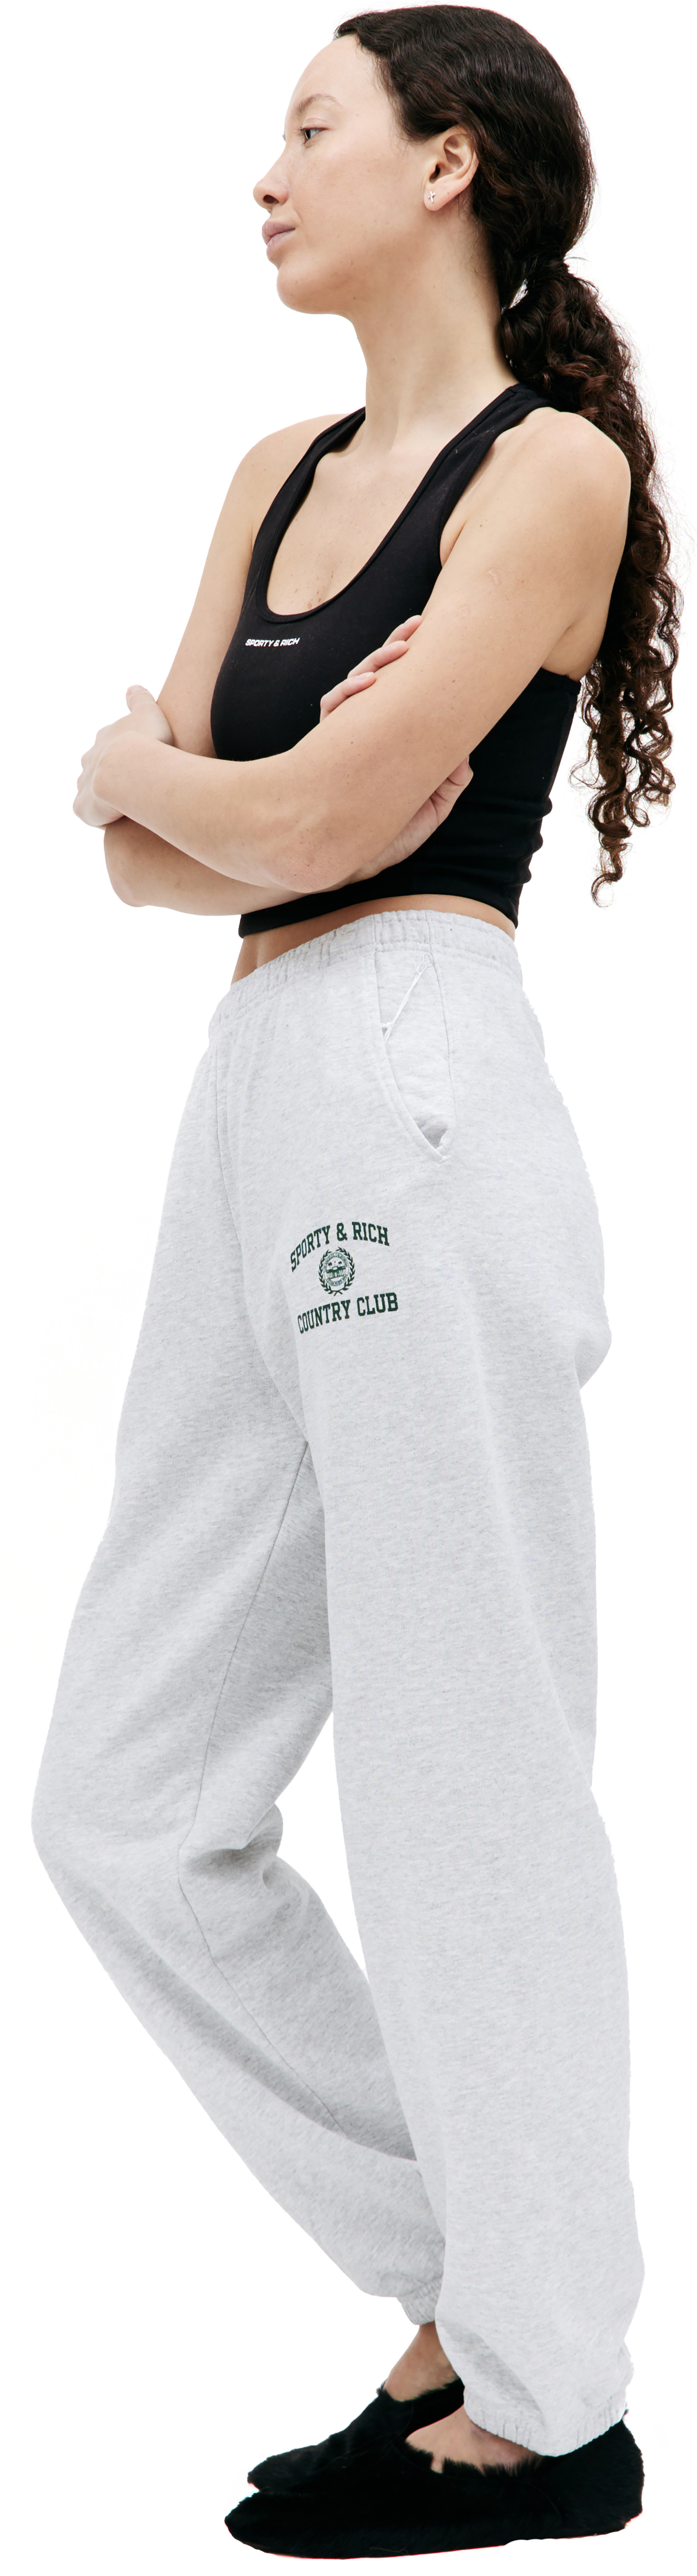 SPORTY & RICH Country Club printed sweatpant